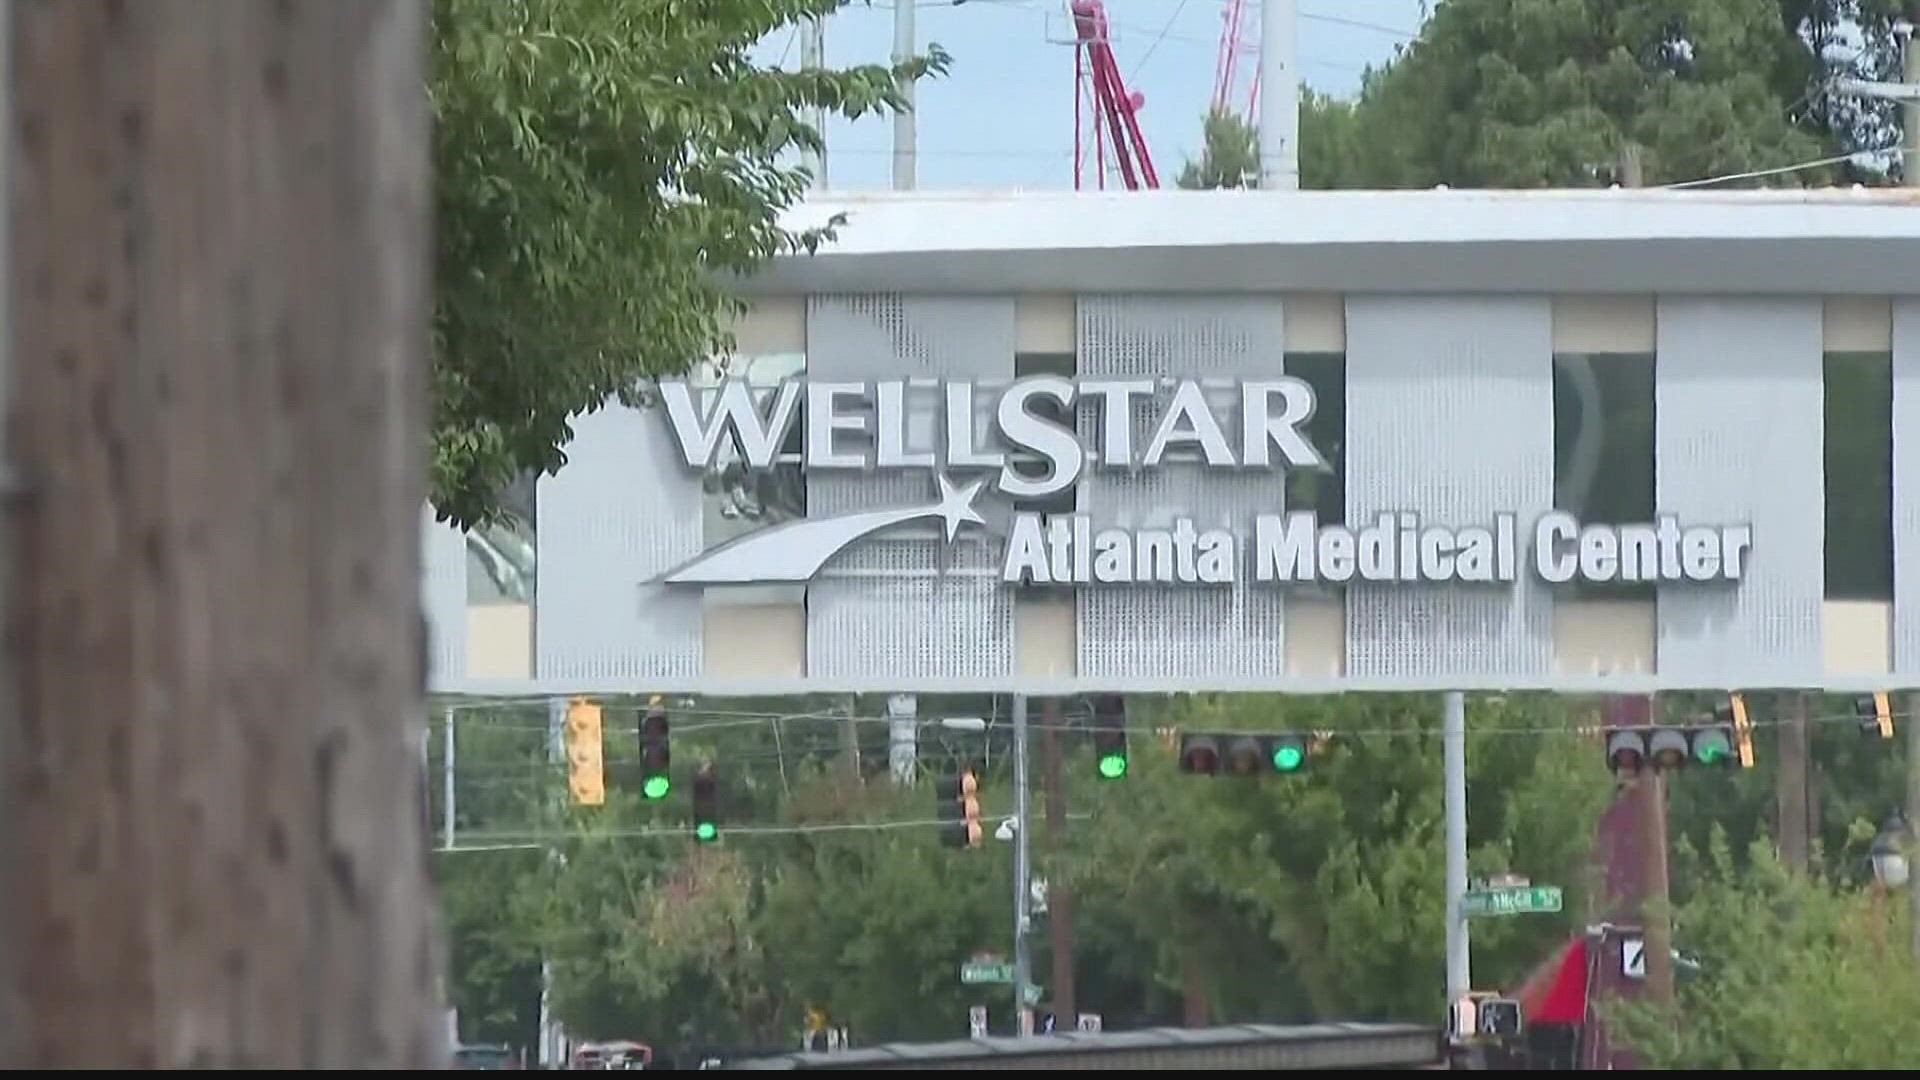 Mayor Andre Dickens is hitting pause on any redevelopment plans for Wellstar Atlanta's Medical Center as it prepares to close in November.